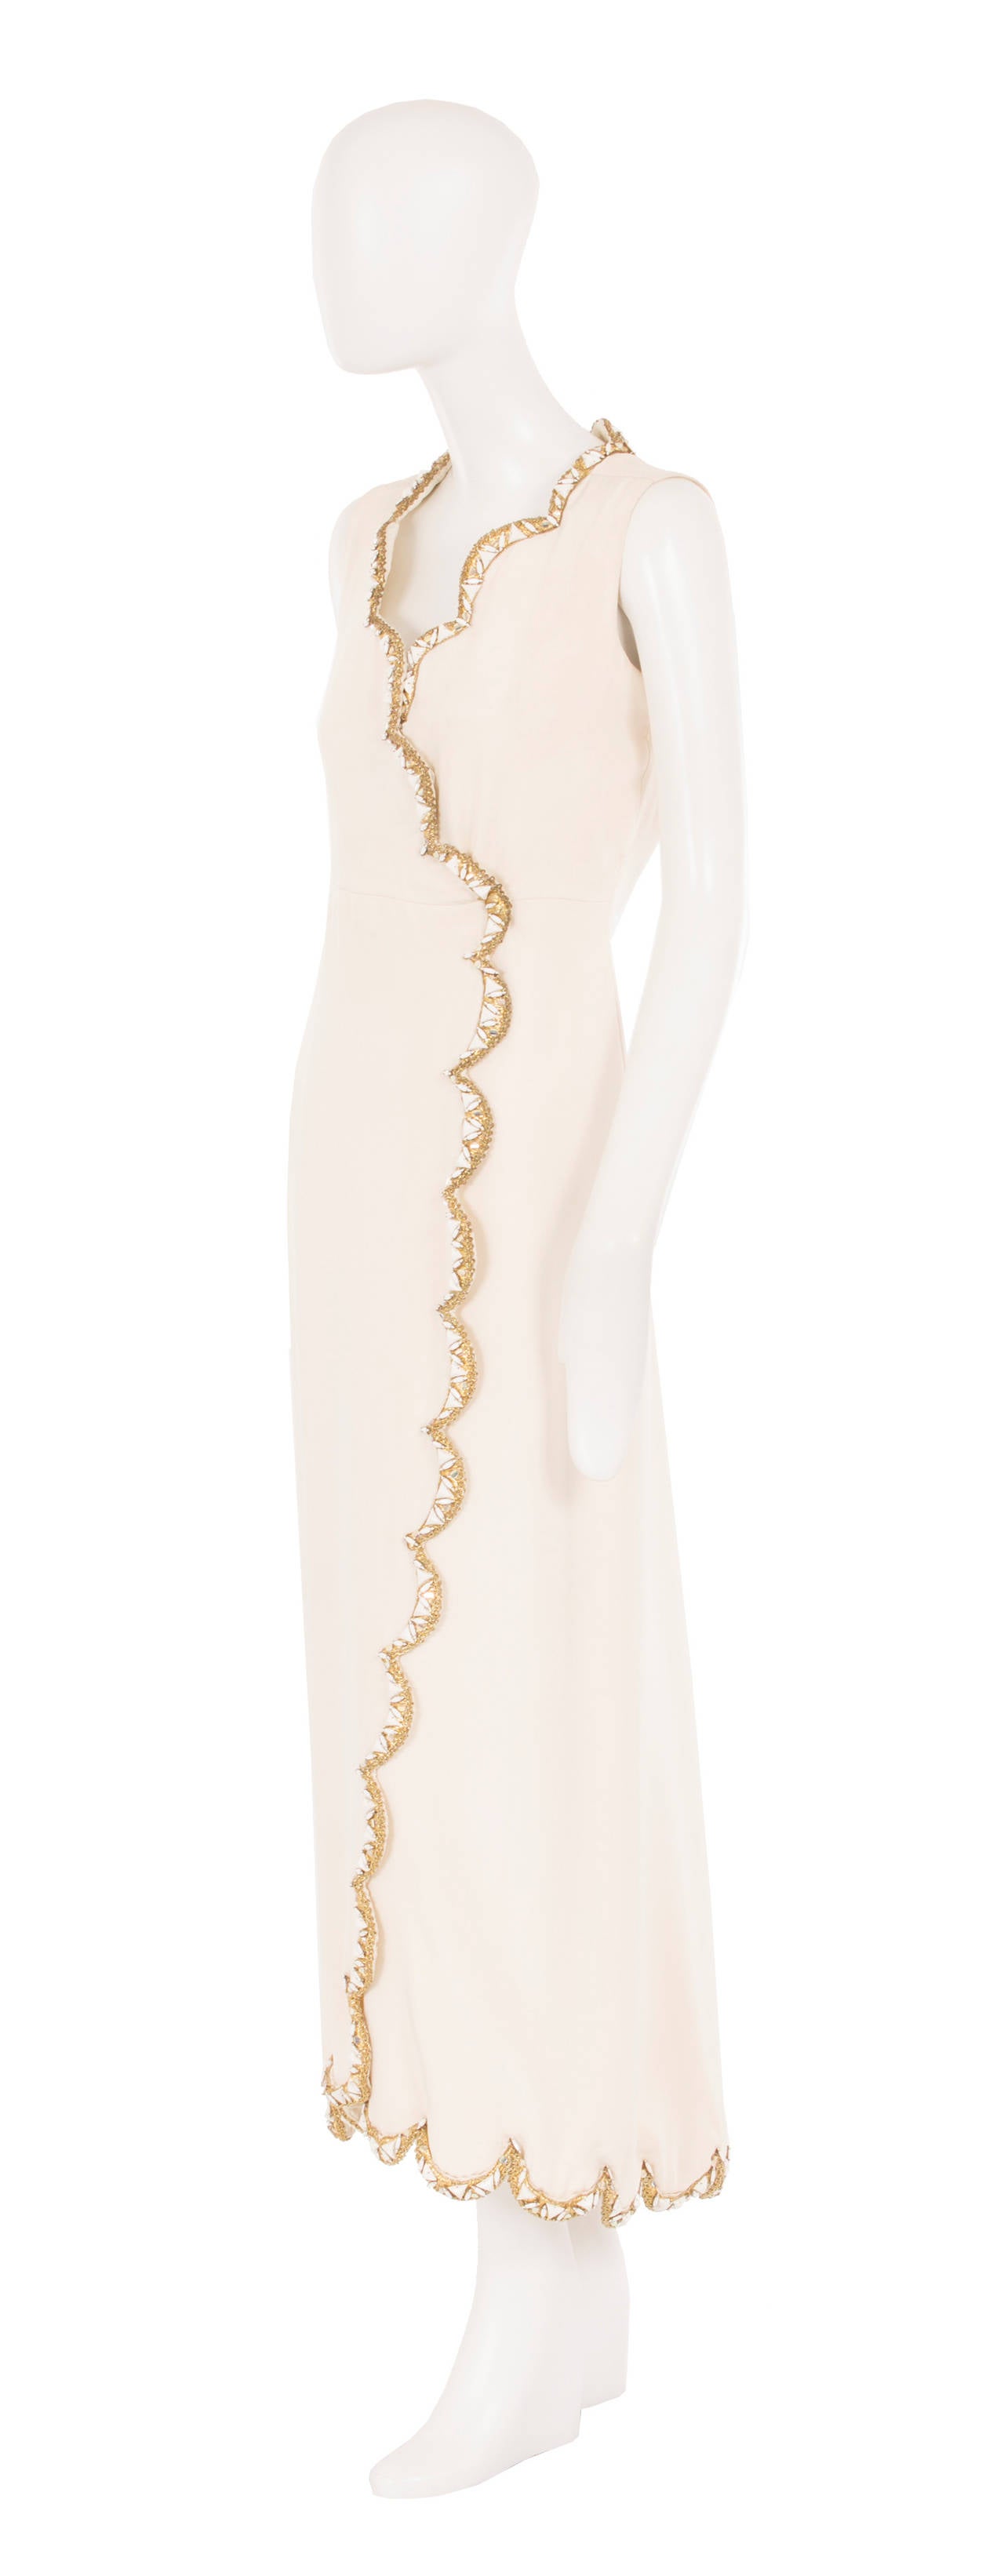 This Dior haute couture wrap dress is a super chic option for a special occasion or black tie event. Constructed in ivory silk, the wrap-style dress fastens with concealed press-studs to the front, and features gold and crystal embellishment to the